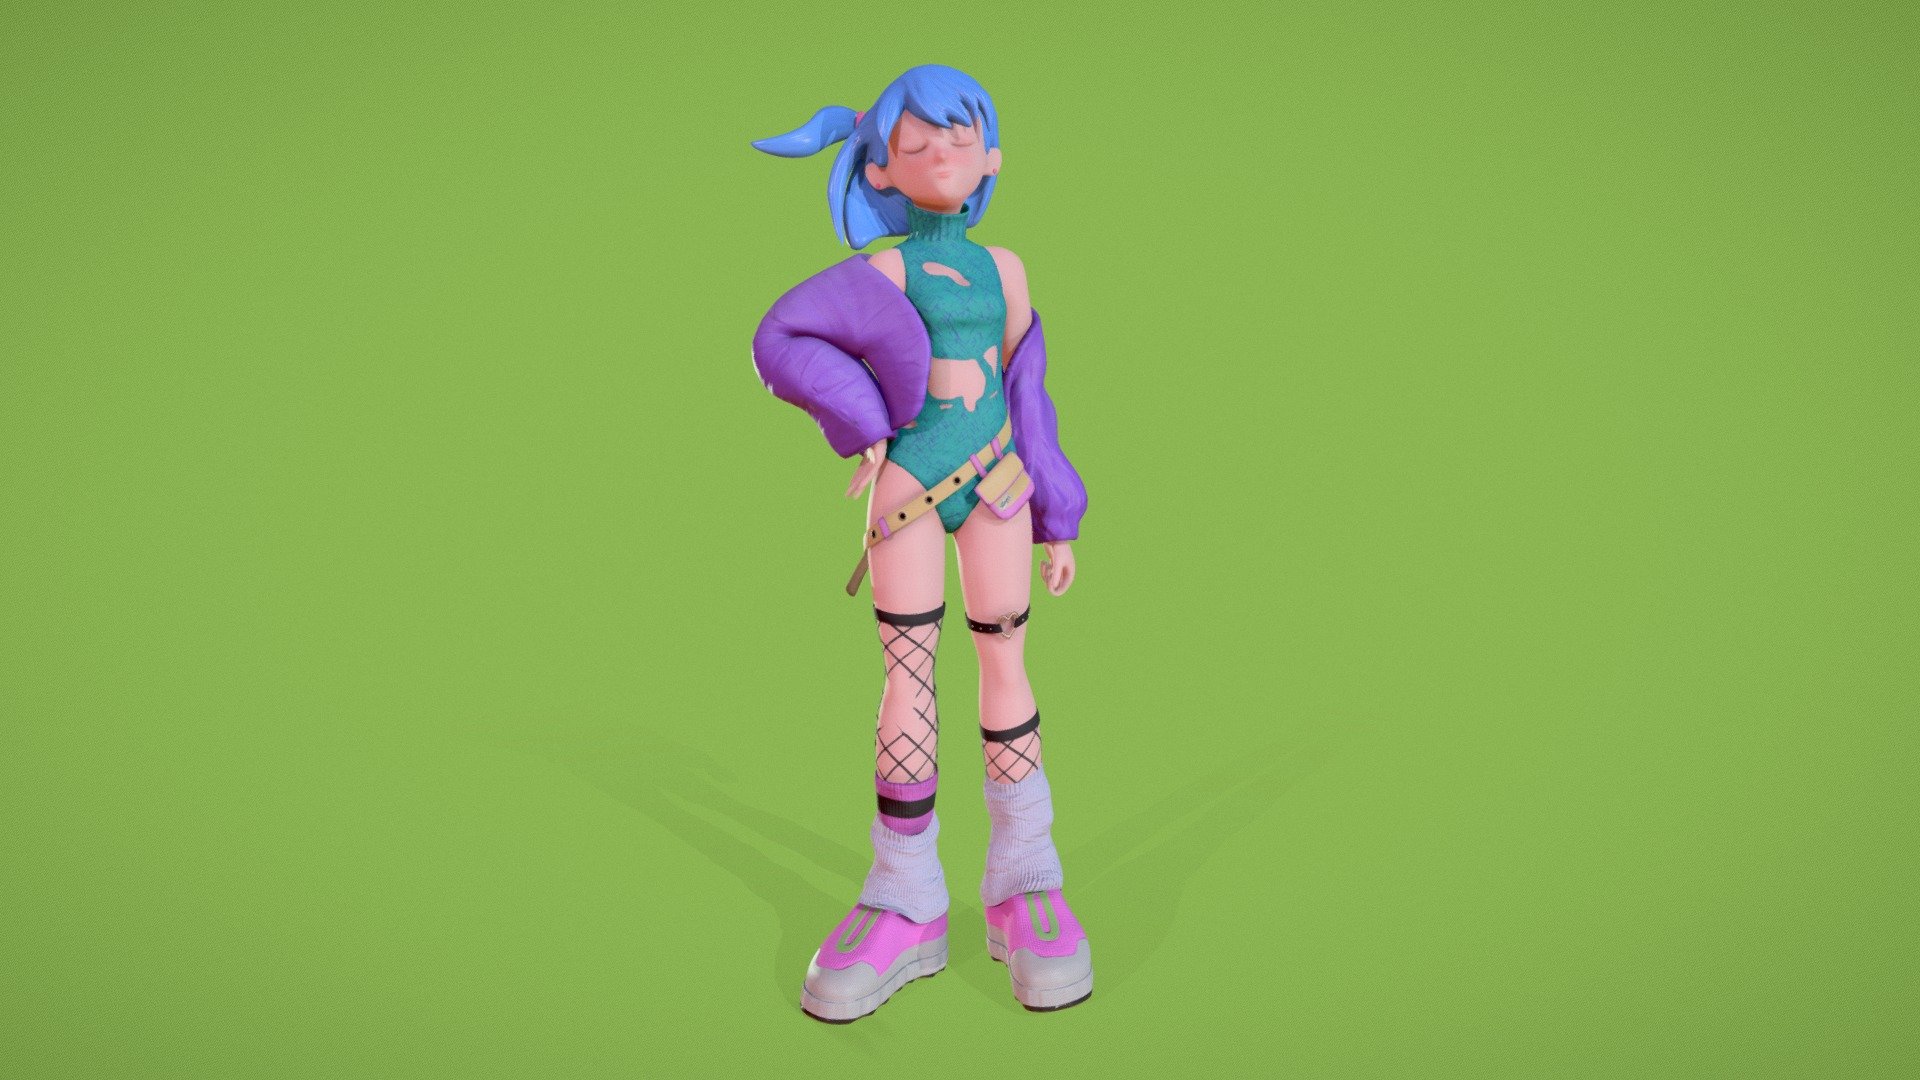 Based on a concept by Xueting Li ( https://www.artstation.com/artwork/3d4Zyo ), really liked the look and wanted to see if I can replicate it on 3d
Sculpted on ZBrush, Retopology and Hard Surface on Maya, Textures on Substance Painter - Stylized Girl Practice - 3D model by MrHoggy (@mr_hoggy) 3d model